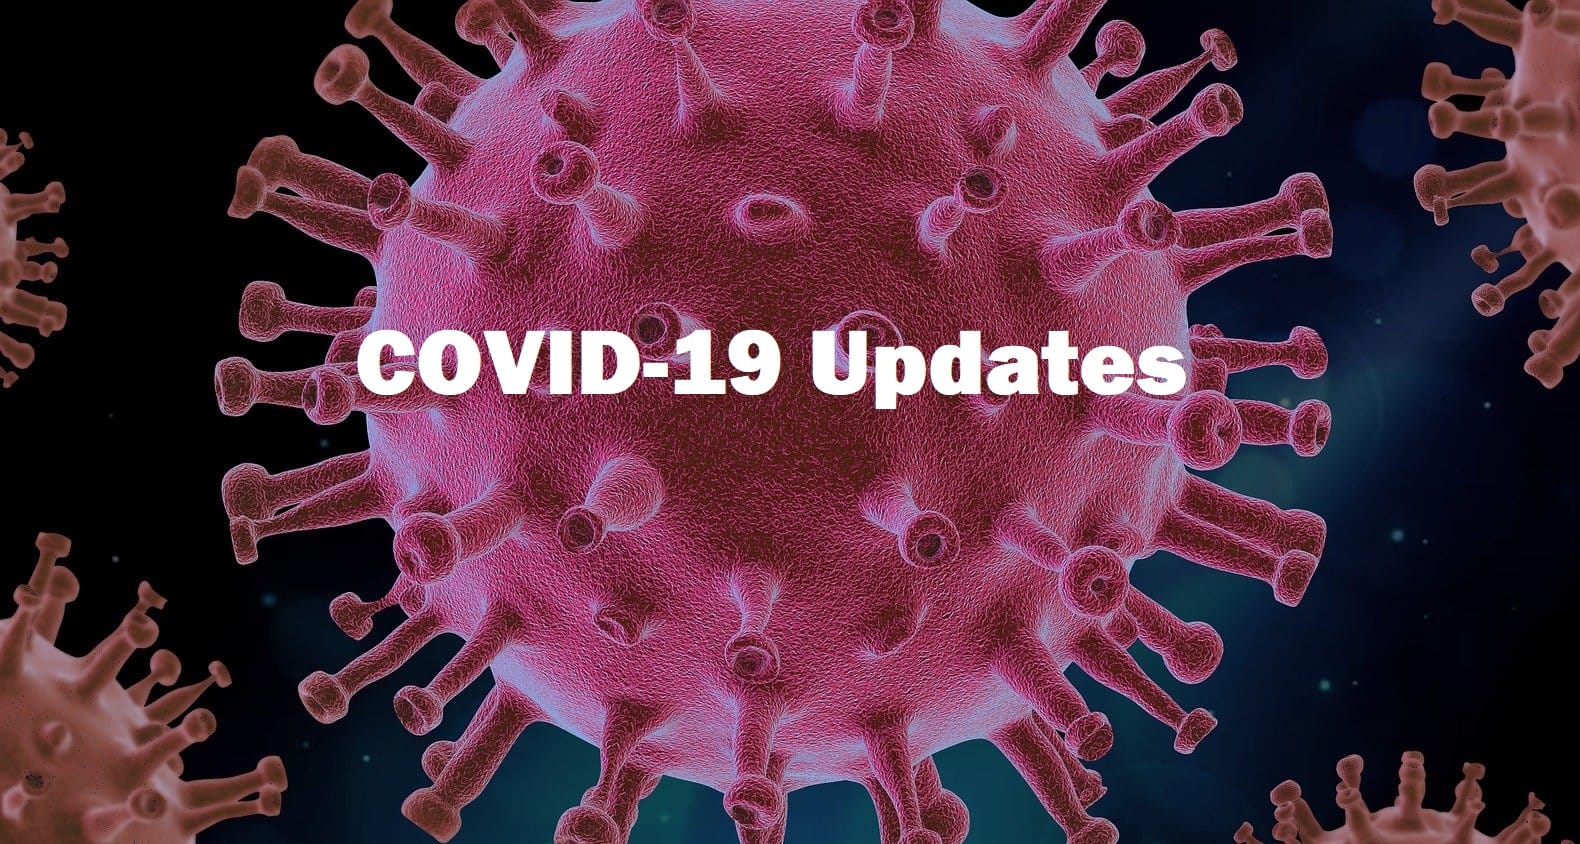 Coronavirus & Covid-19 Overview: Symptoms, Risks and all you want to know